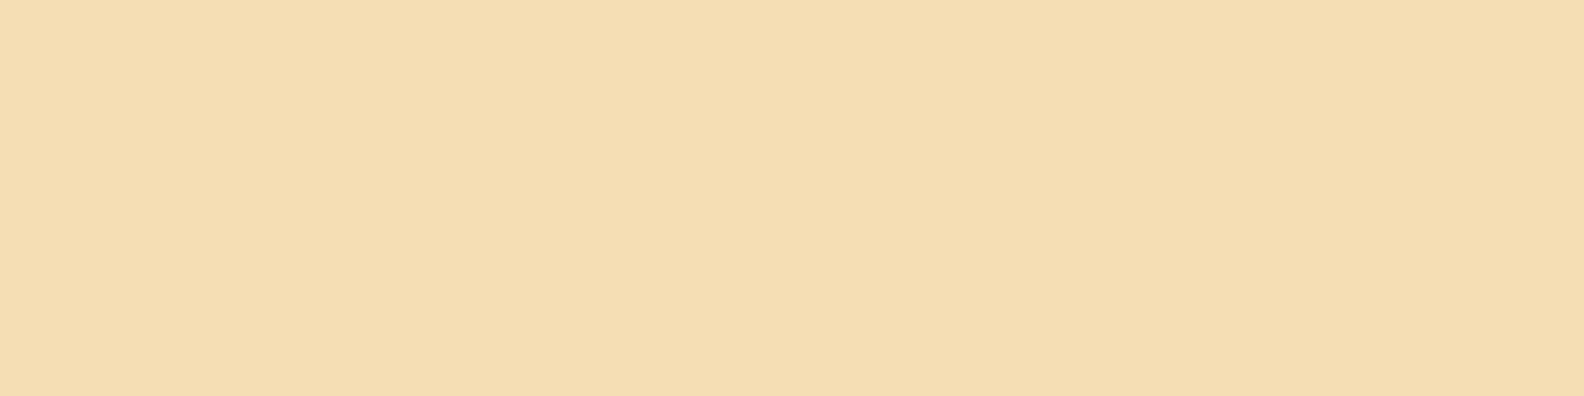 1584x396 Wheat Solid Color Background